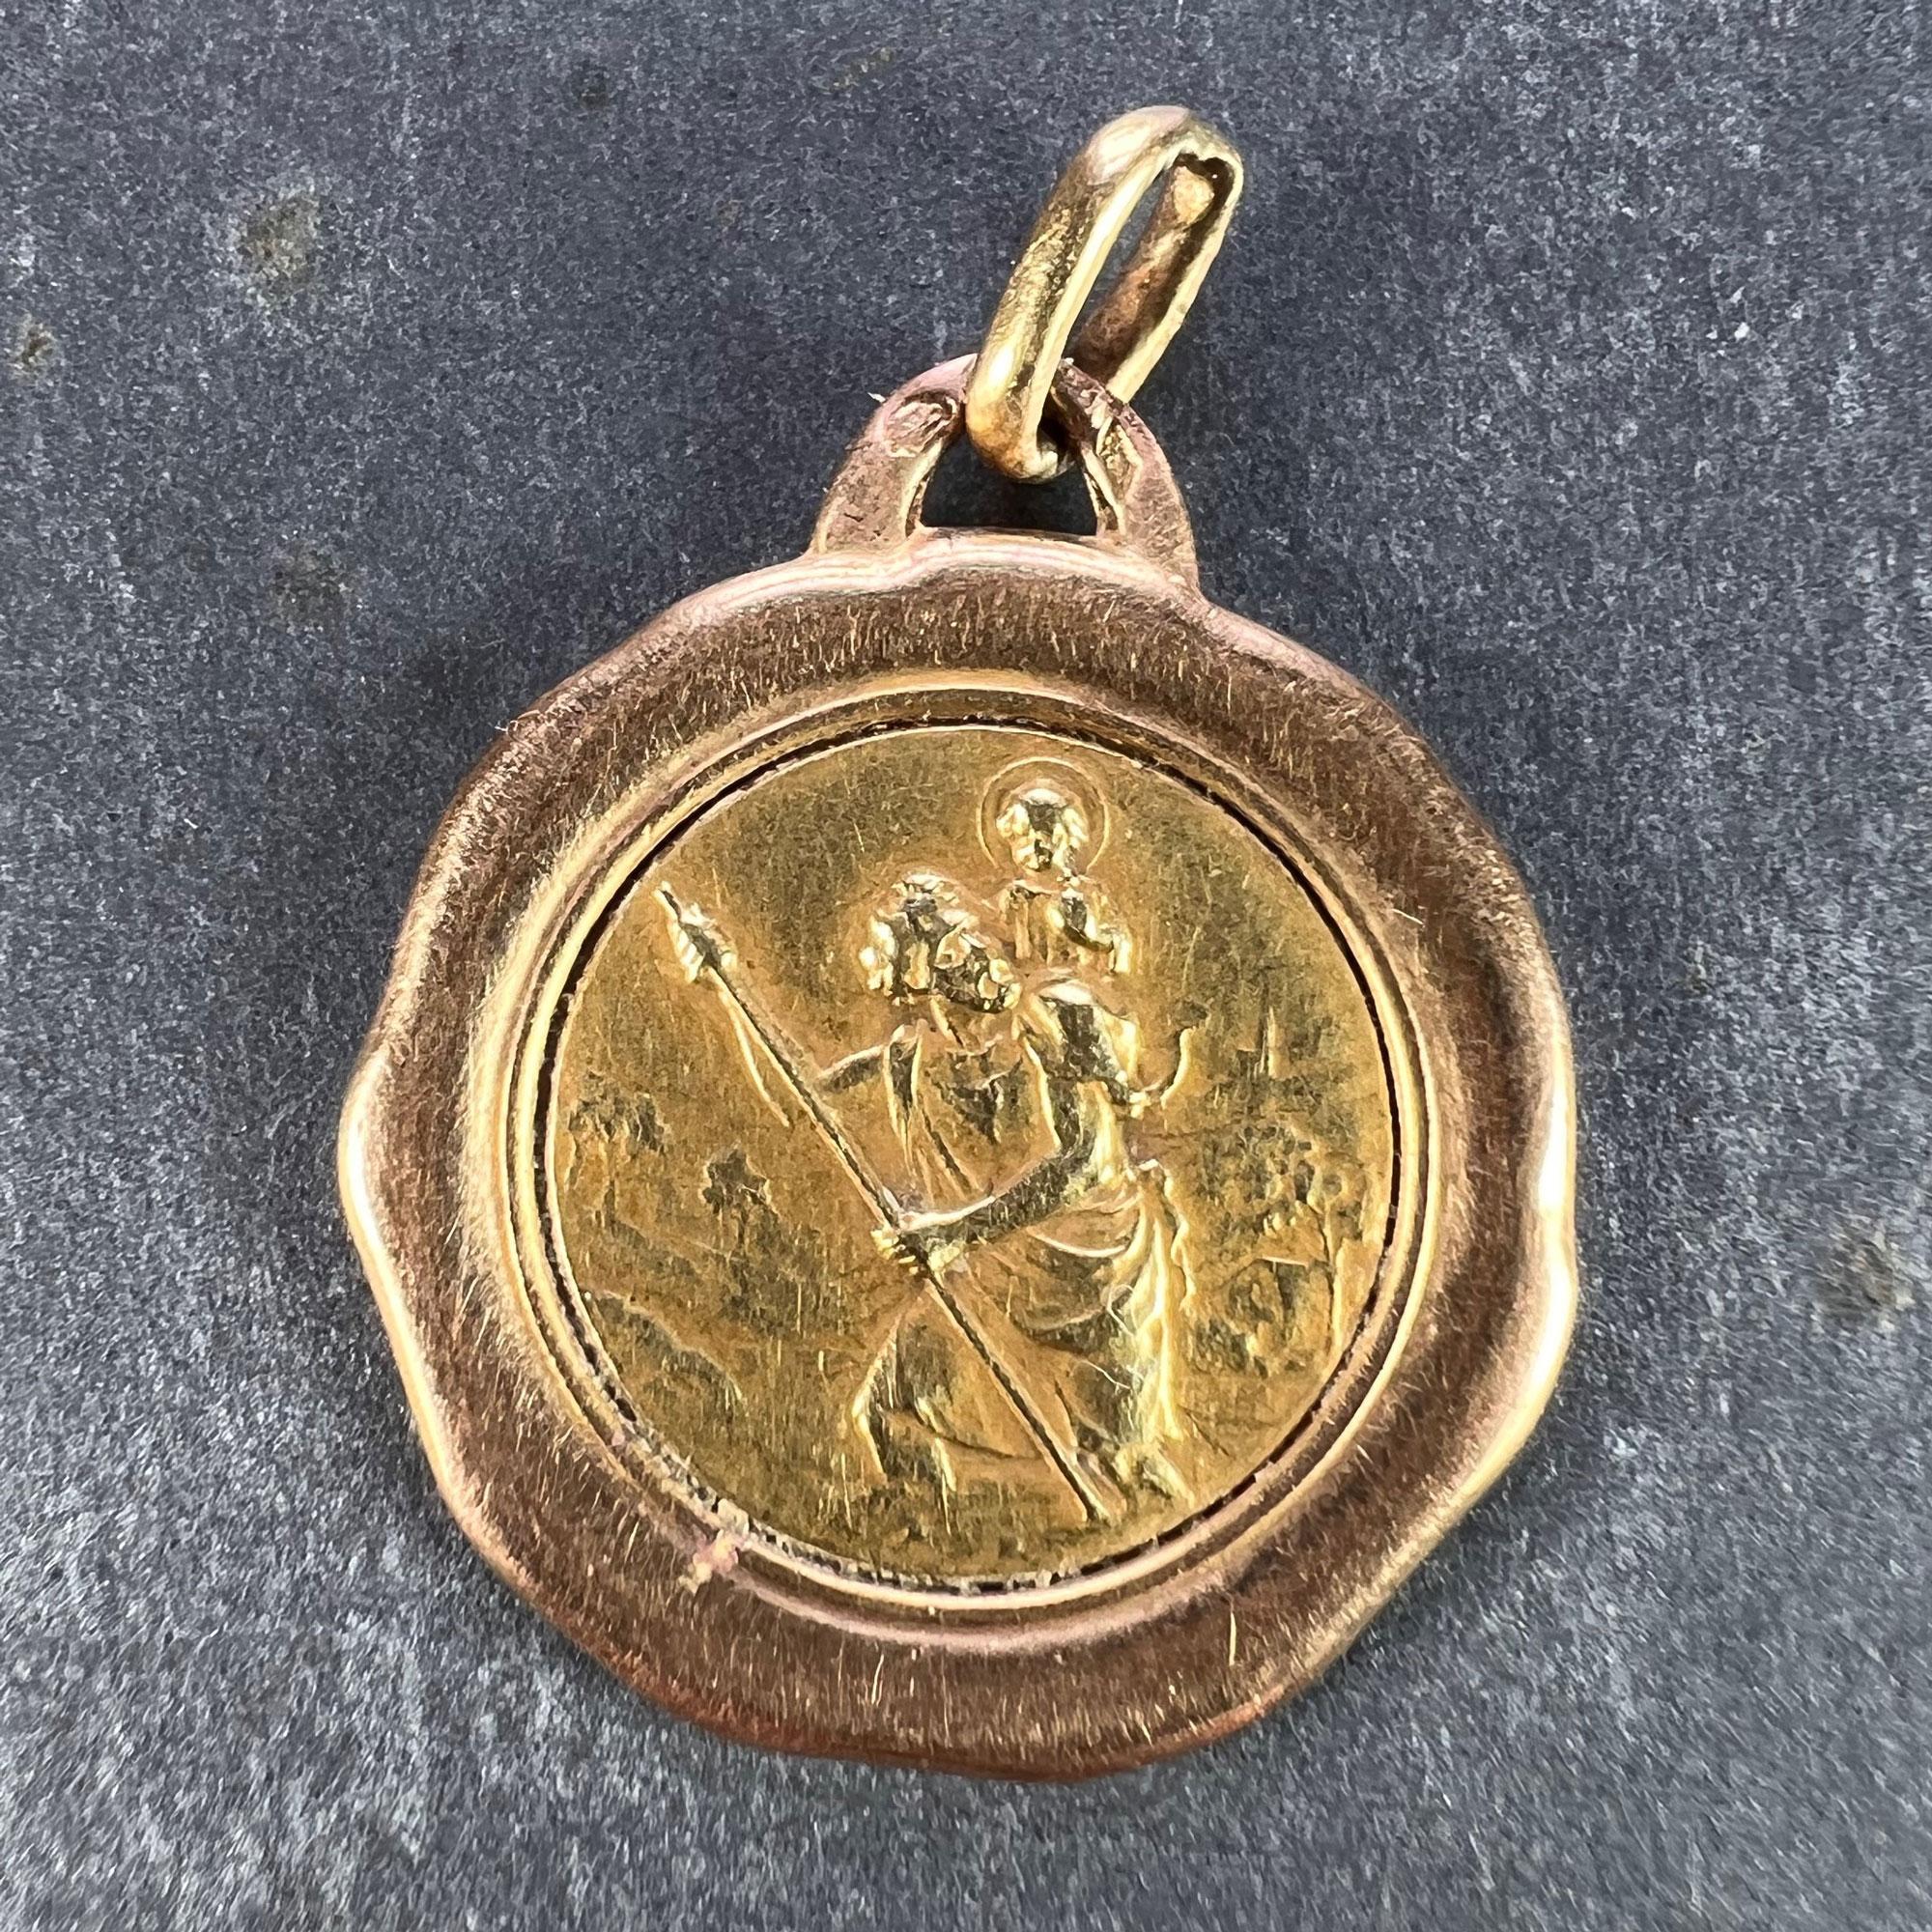 A French 18 karat (18K) yellow gold charm pendant depicting St Christopher as he carries the infant Christ across a river set in a wavy rose gold frame. Stamped with the eagle’s head for French manufacture and 18 carat gold, and an unknown maker’s